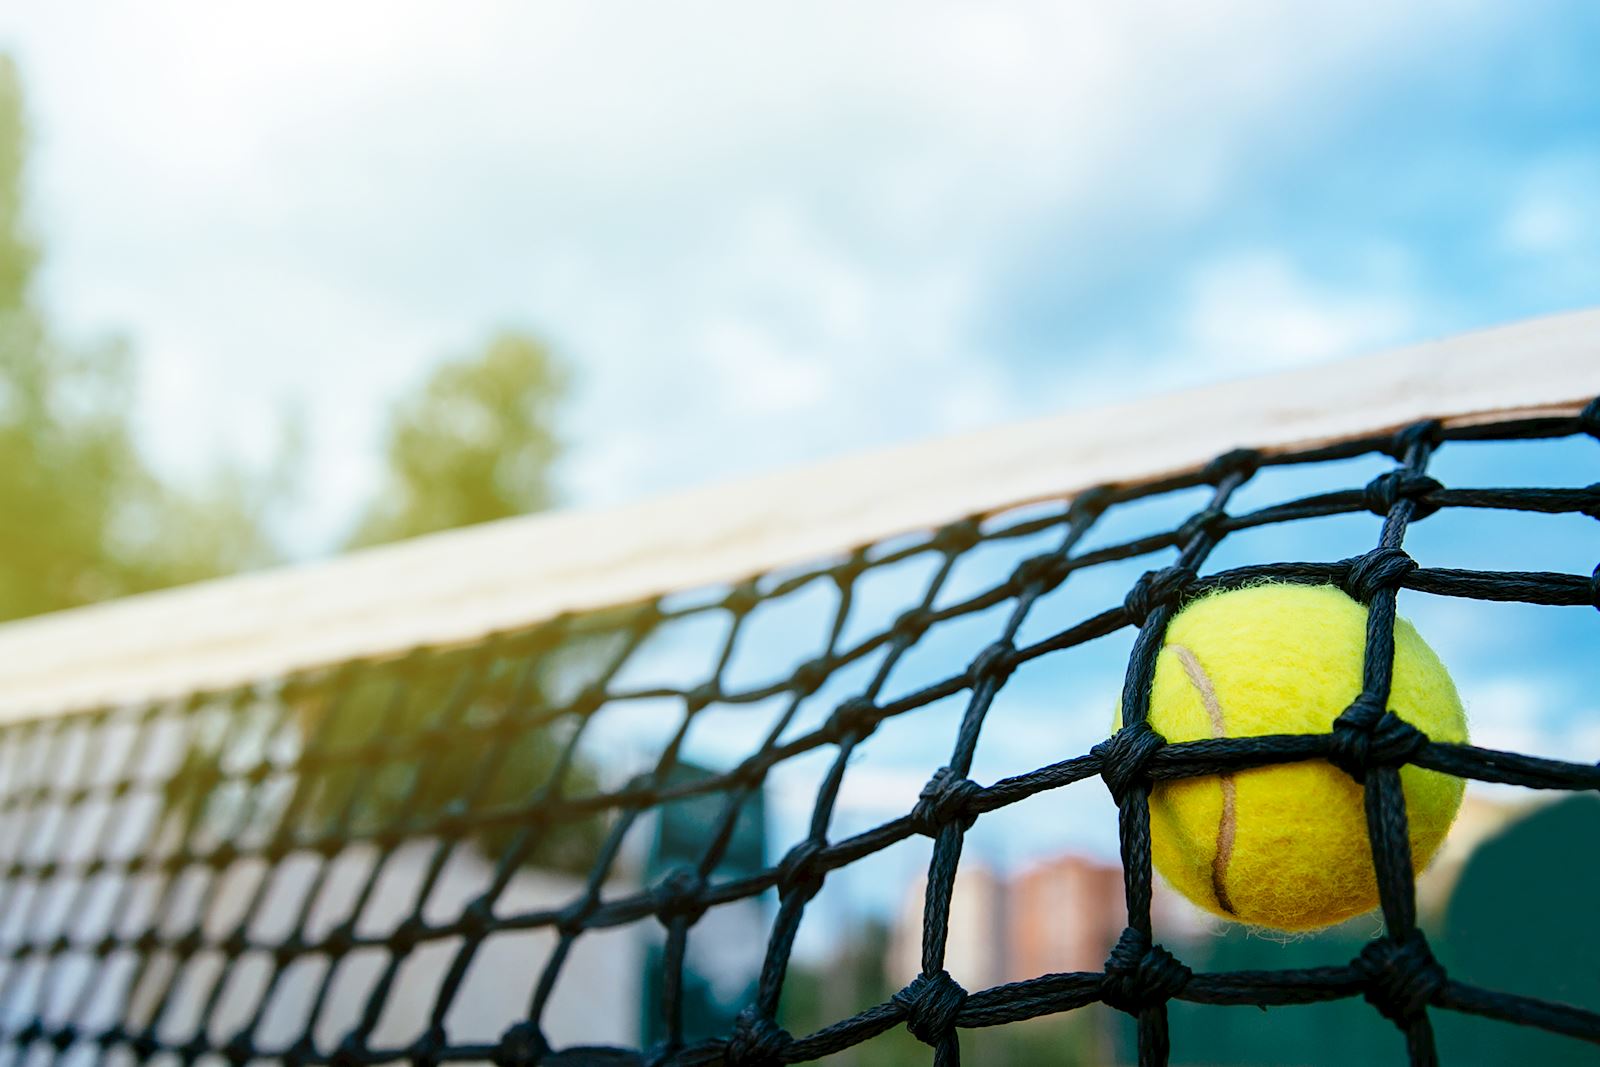 <a href="https://www.freepik.com/free-photo/close-up-photo-tennis-ball-hitting-net-sport-concept_2584034.htm#query=tennis&position=0&from_view=keyword&track=sph">Image by freepic.diller</a> on Freepik